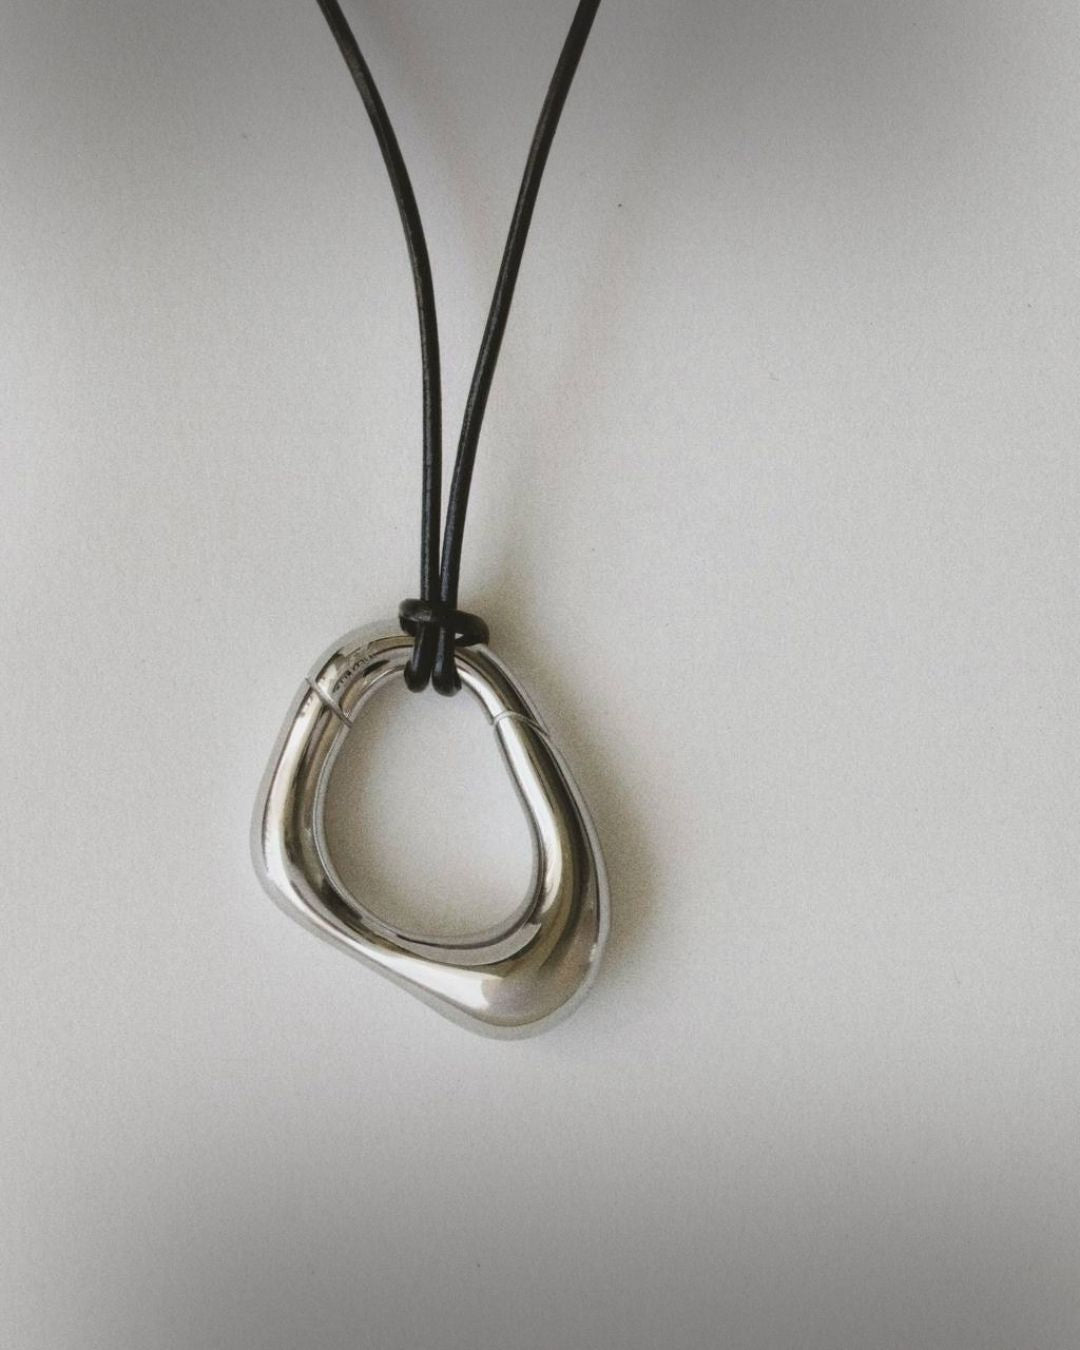 Momentum Necklace in silver color by Enso Design Lab, displayed flat with a leather cord. The pendant's unique, liquid-inspired design is clearly visible.